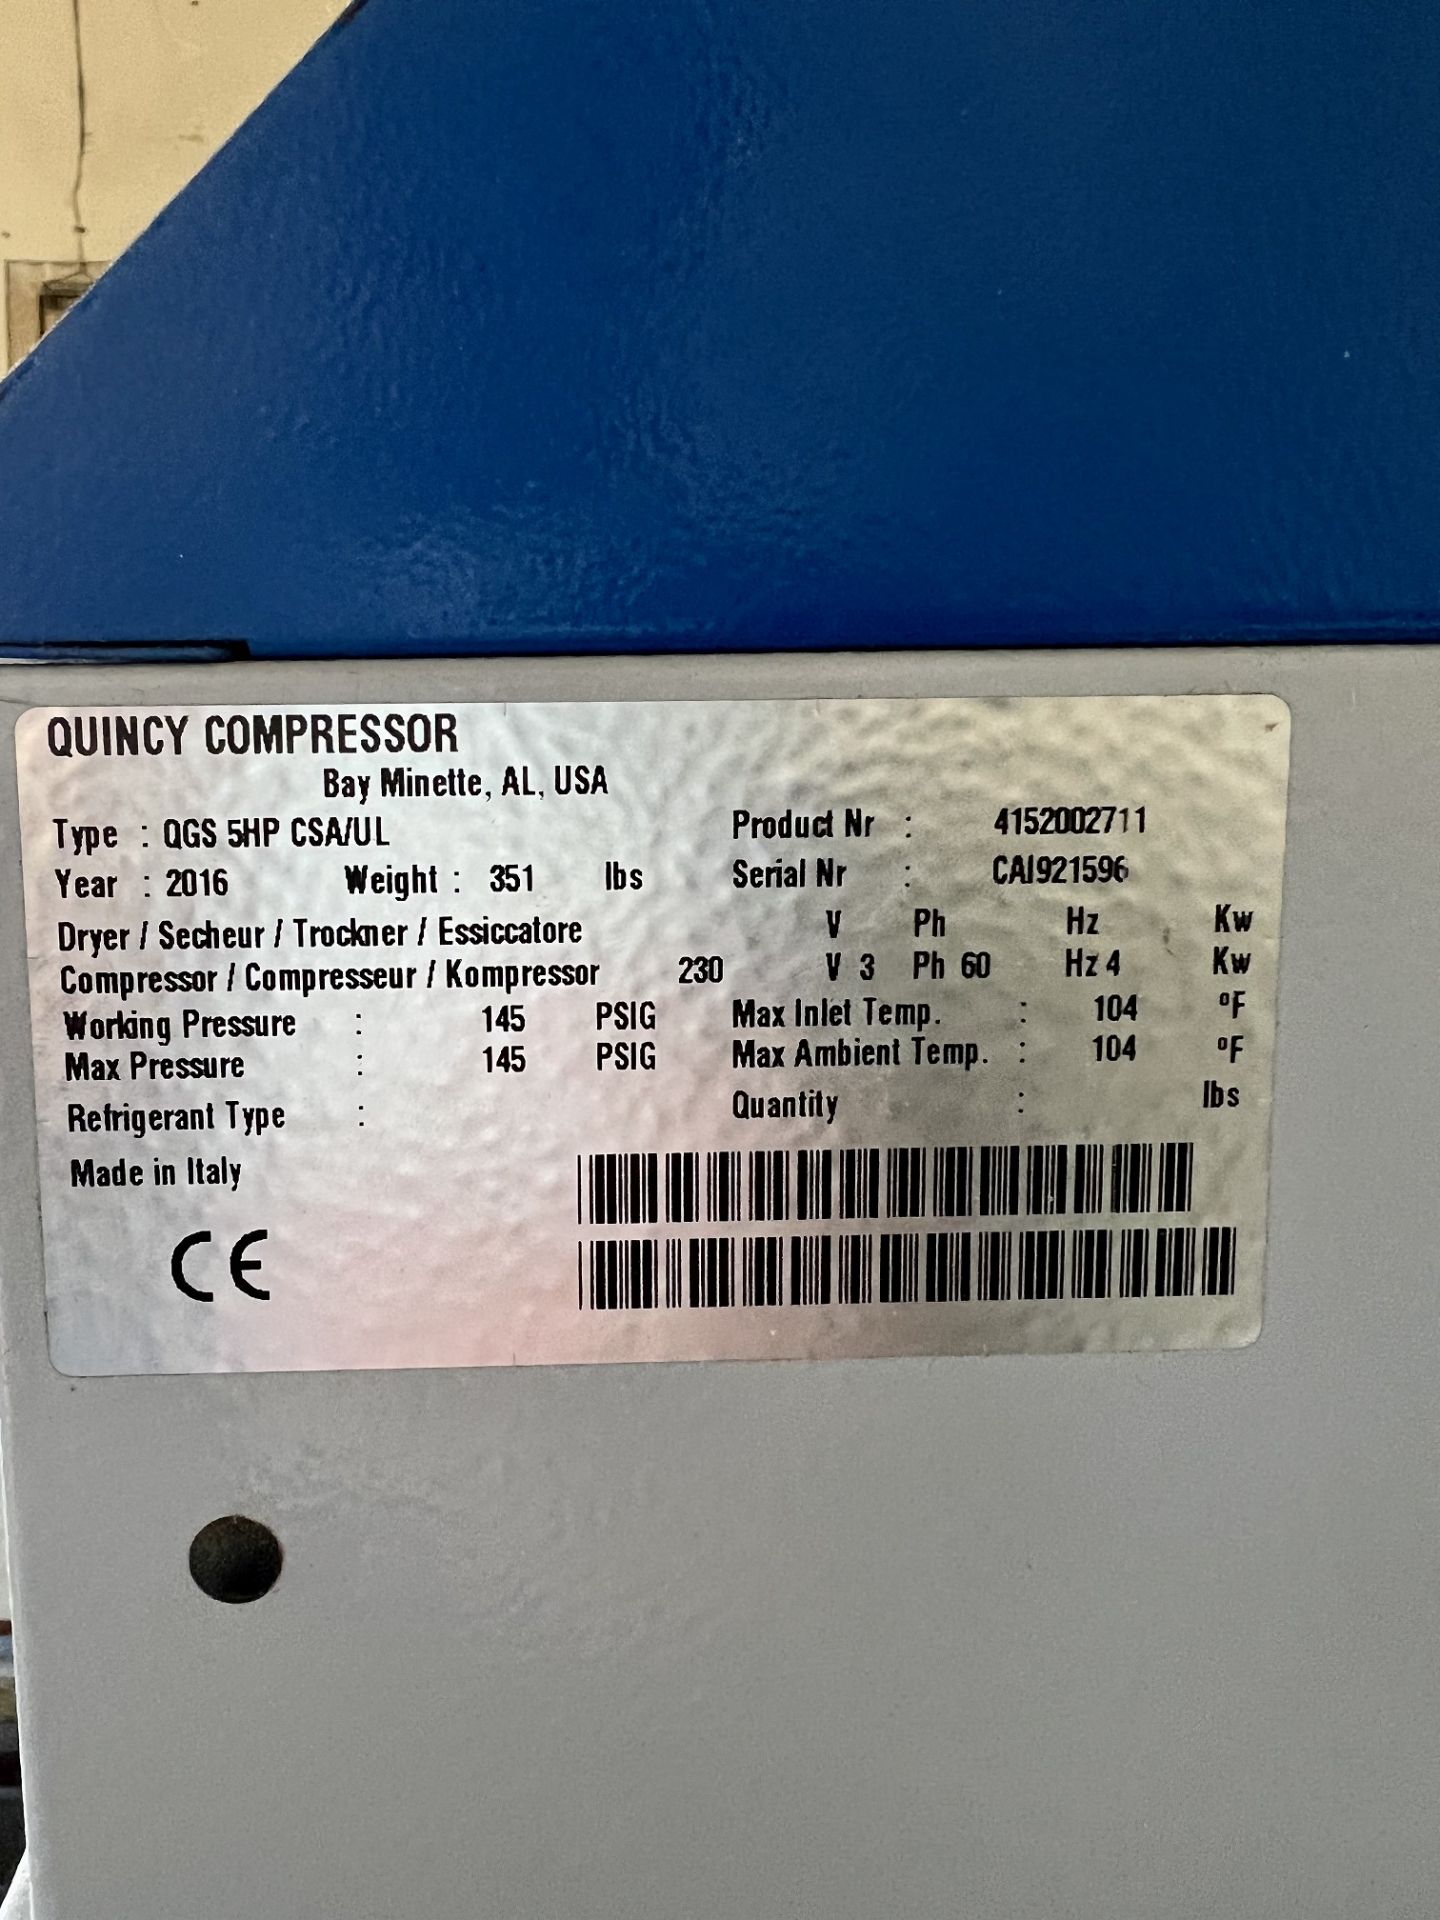 2016 QUINCY QGS-5 ROTARY SCREW COMPRESSOR, 5 HP, 969 HOURS, S/N CAI921596 - Image 4 of 5